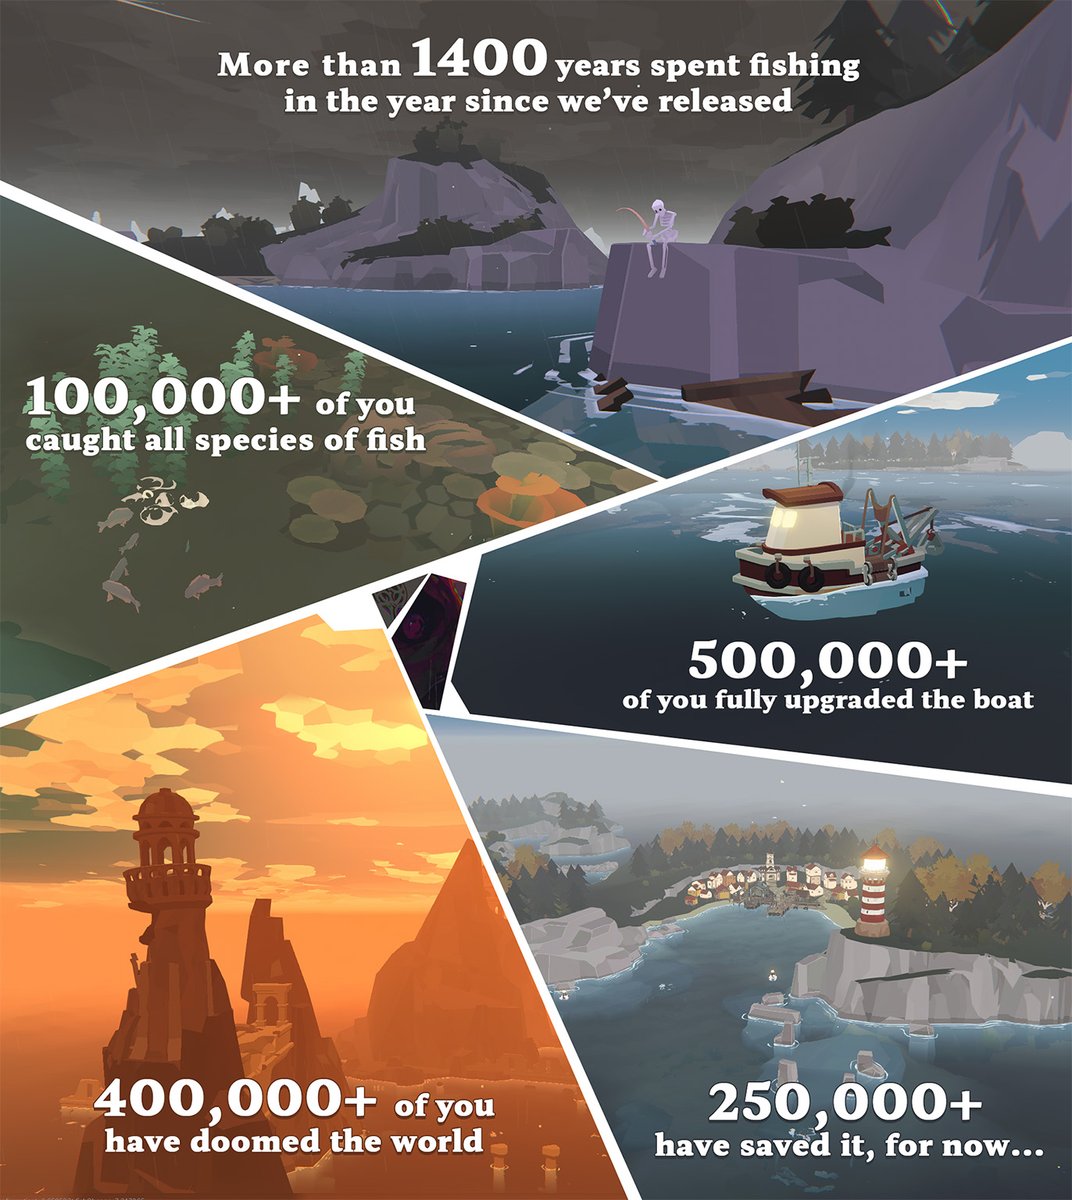 One year ago today, we released DREDGE to the world! 🌏 Since then: 🐟 100,000+ caught all species of fish ⛵ 500,000+ fully upgraded the boat 🗺️ 250,000+ saved the world, for now... Happy Dredge-versary! Thank you all for your support over the last twelve months 🥳